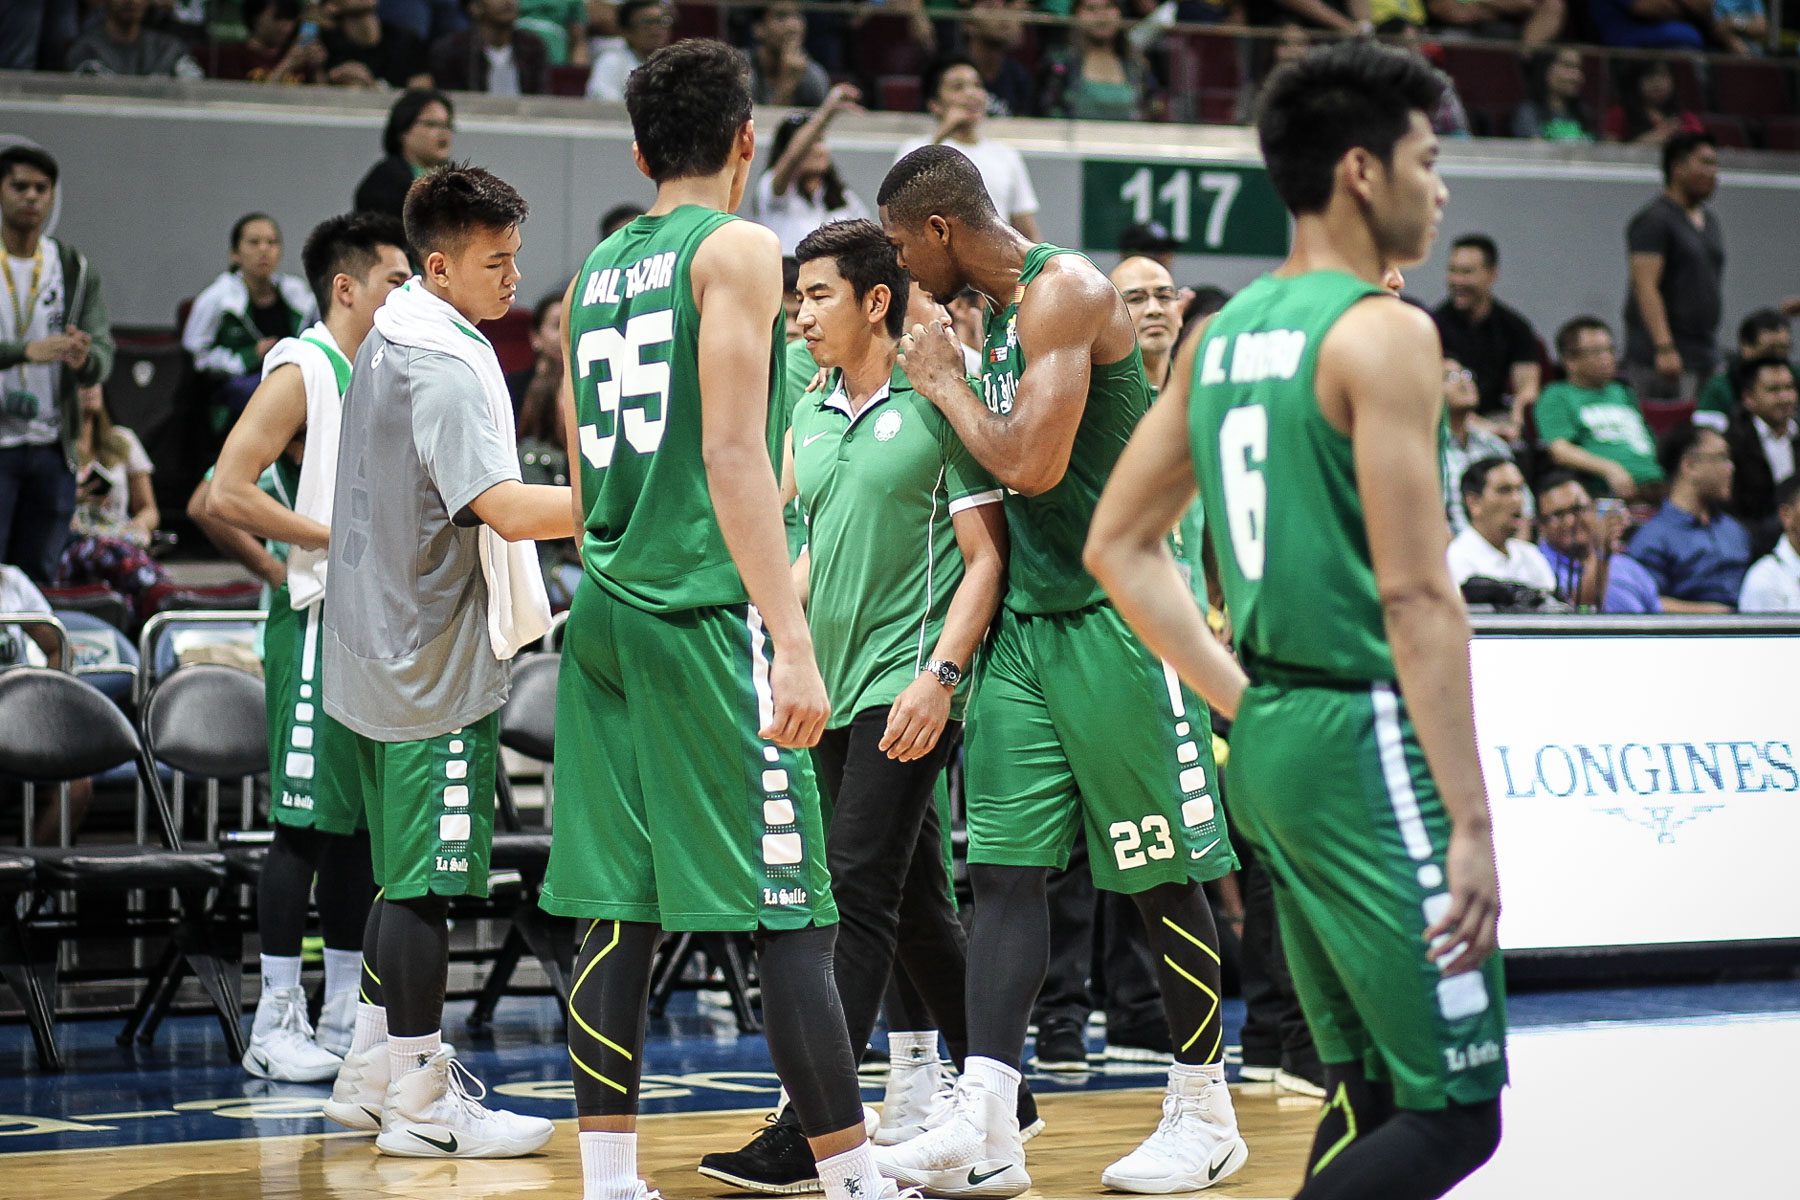 How an Mbala-Ayo scuffle nearly prevented a La Salle title